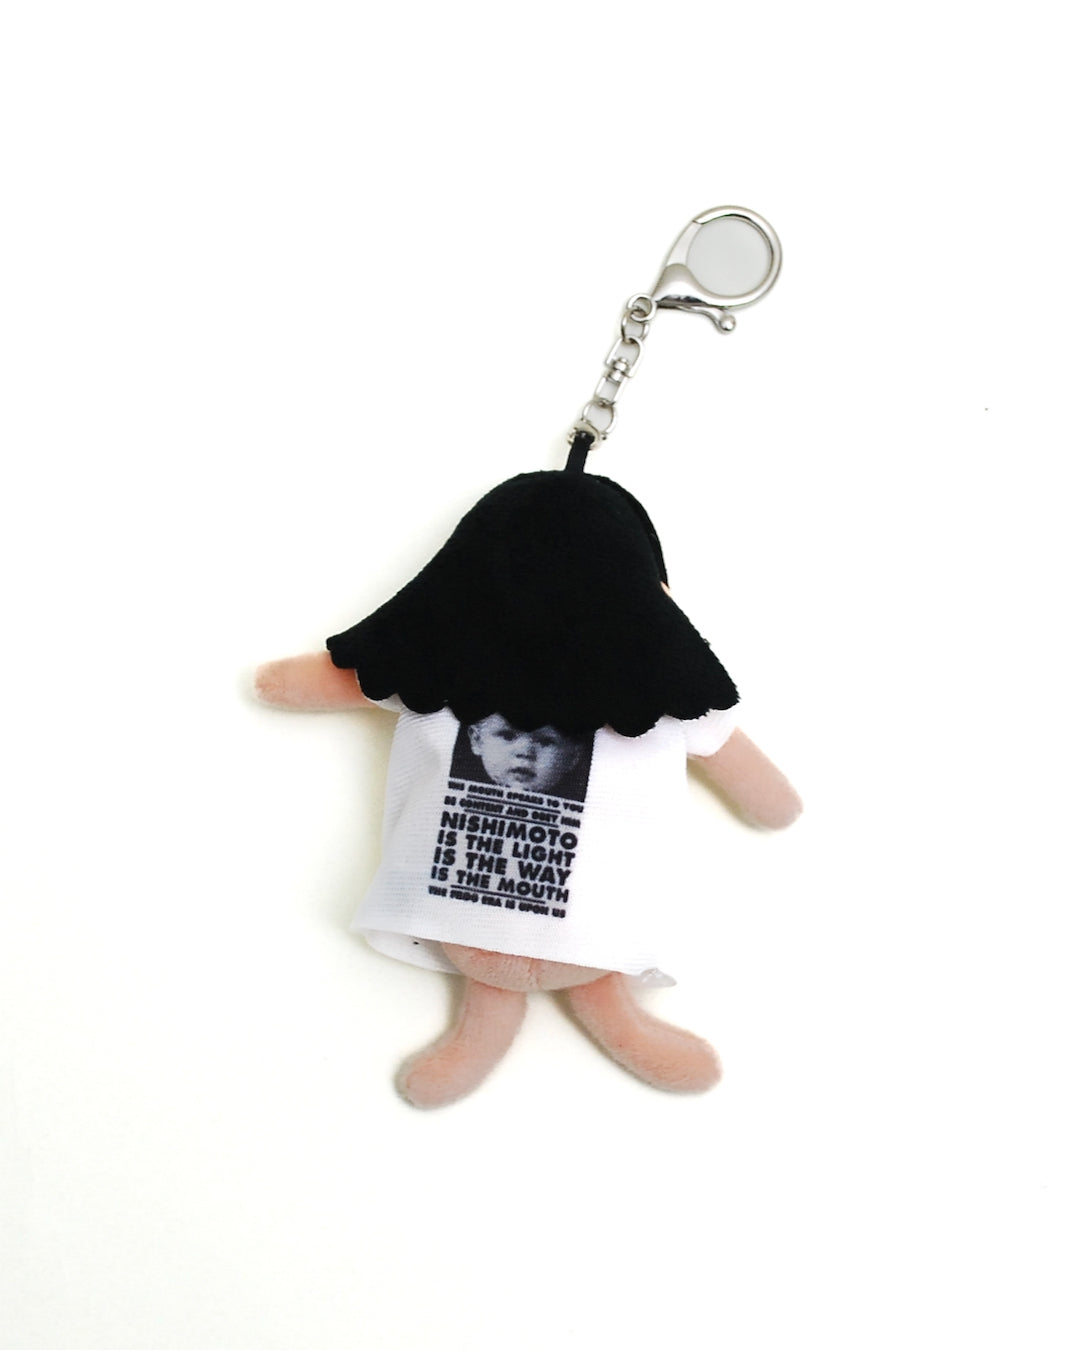 NISHIMOTO IS THE MOUTH SOFT TOY KEYHOLDER